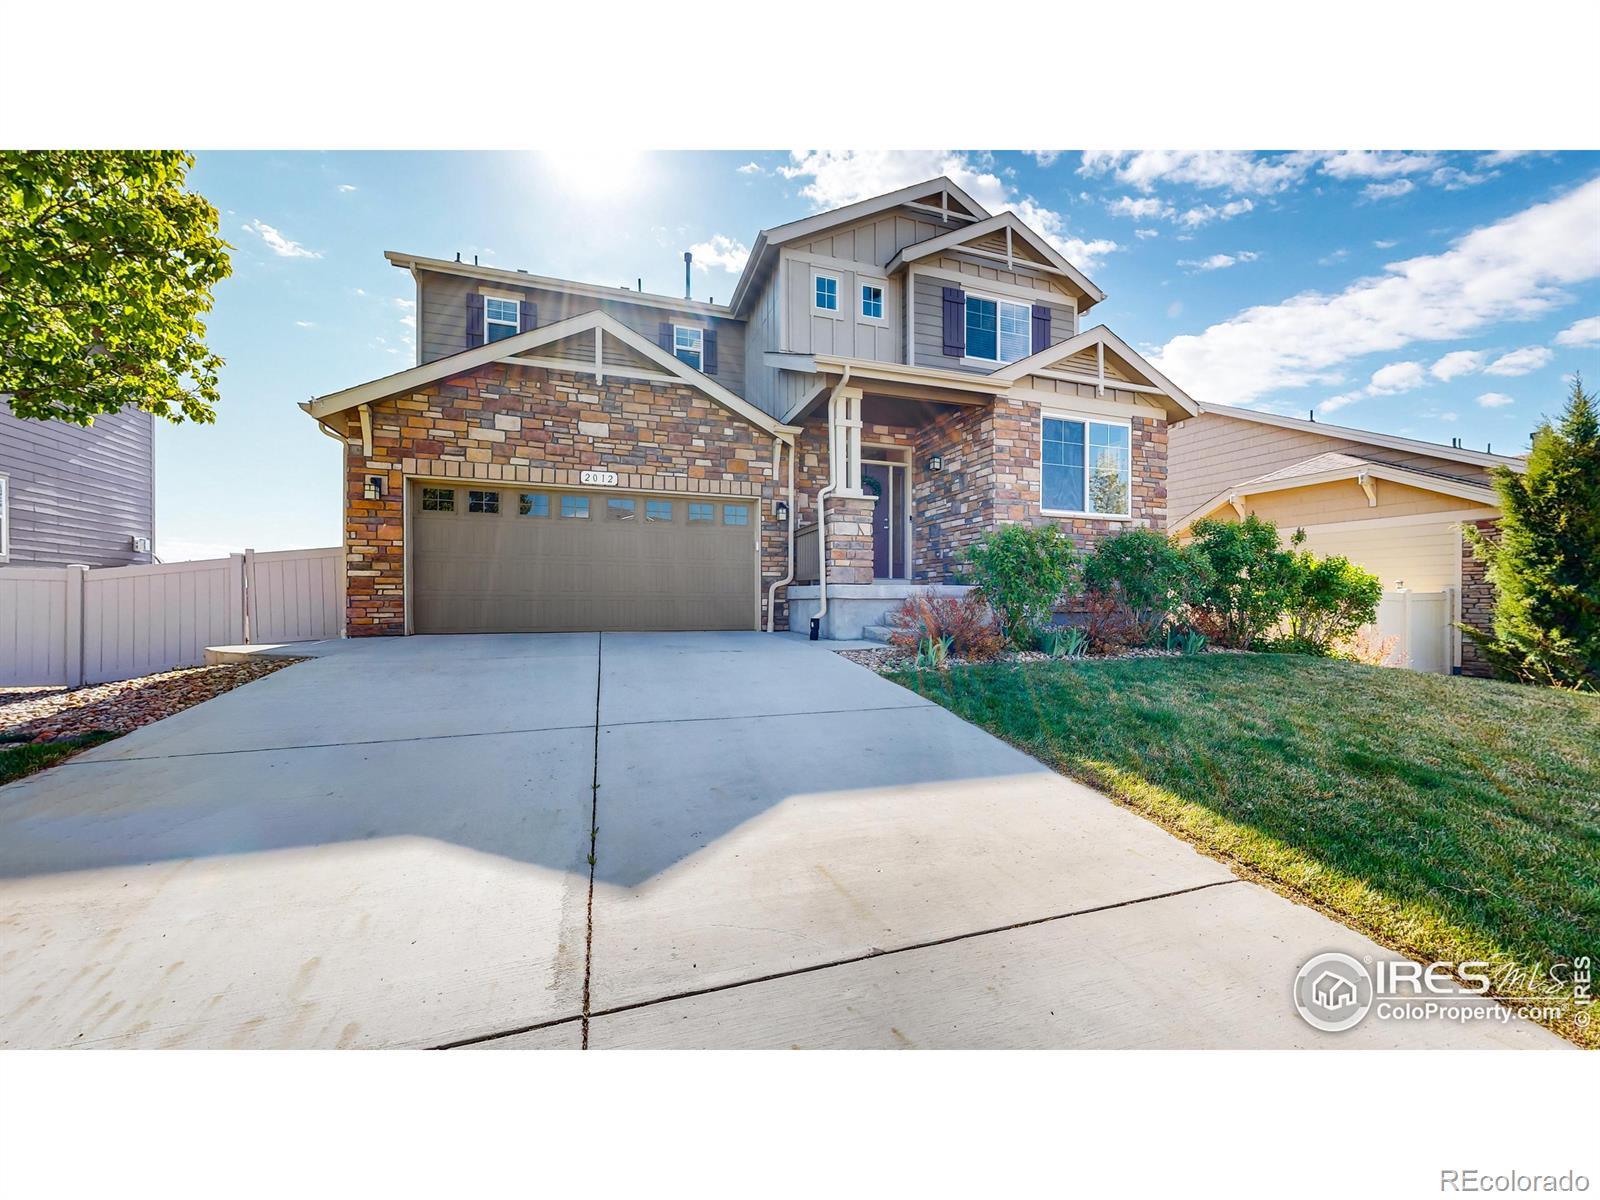 CMA Image for 2022  81st ave ct,Greeley, Colorado